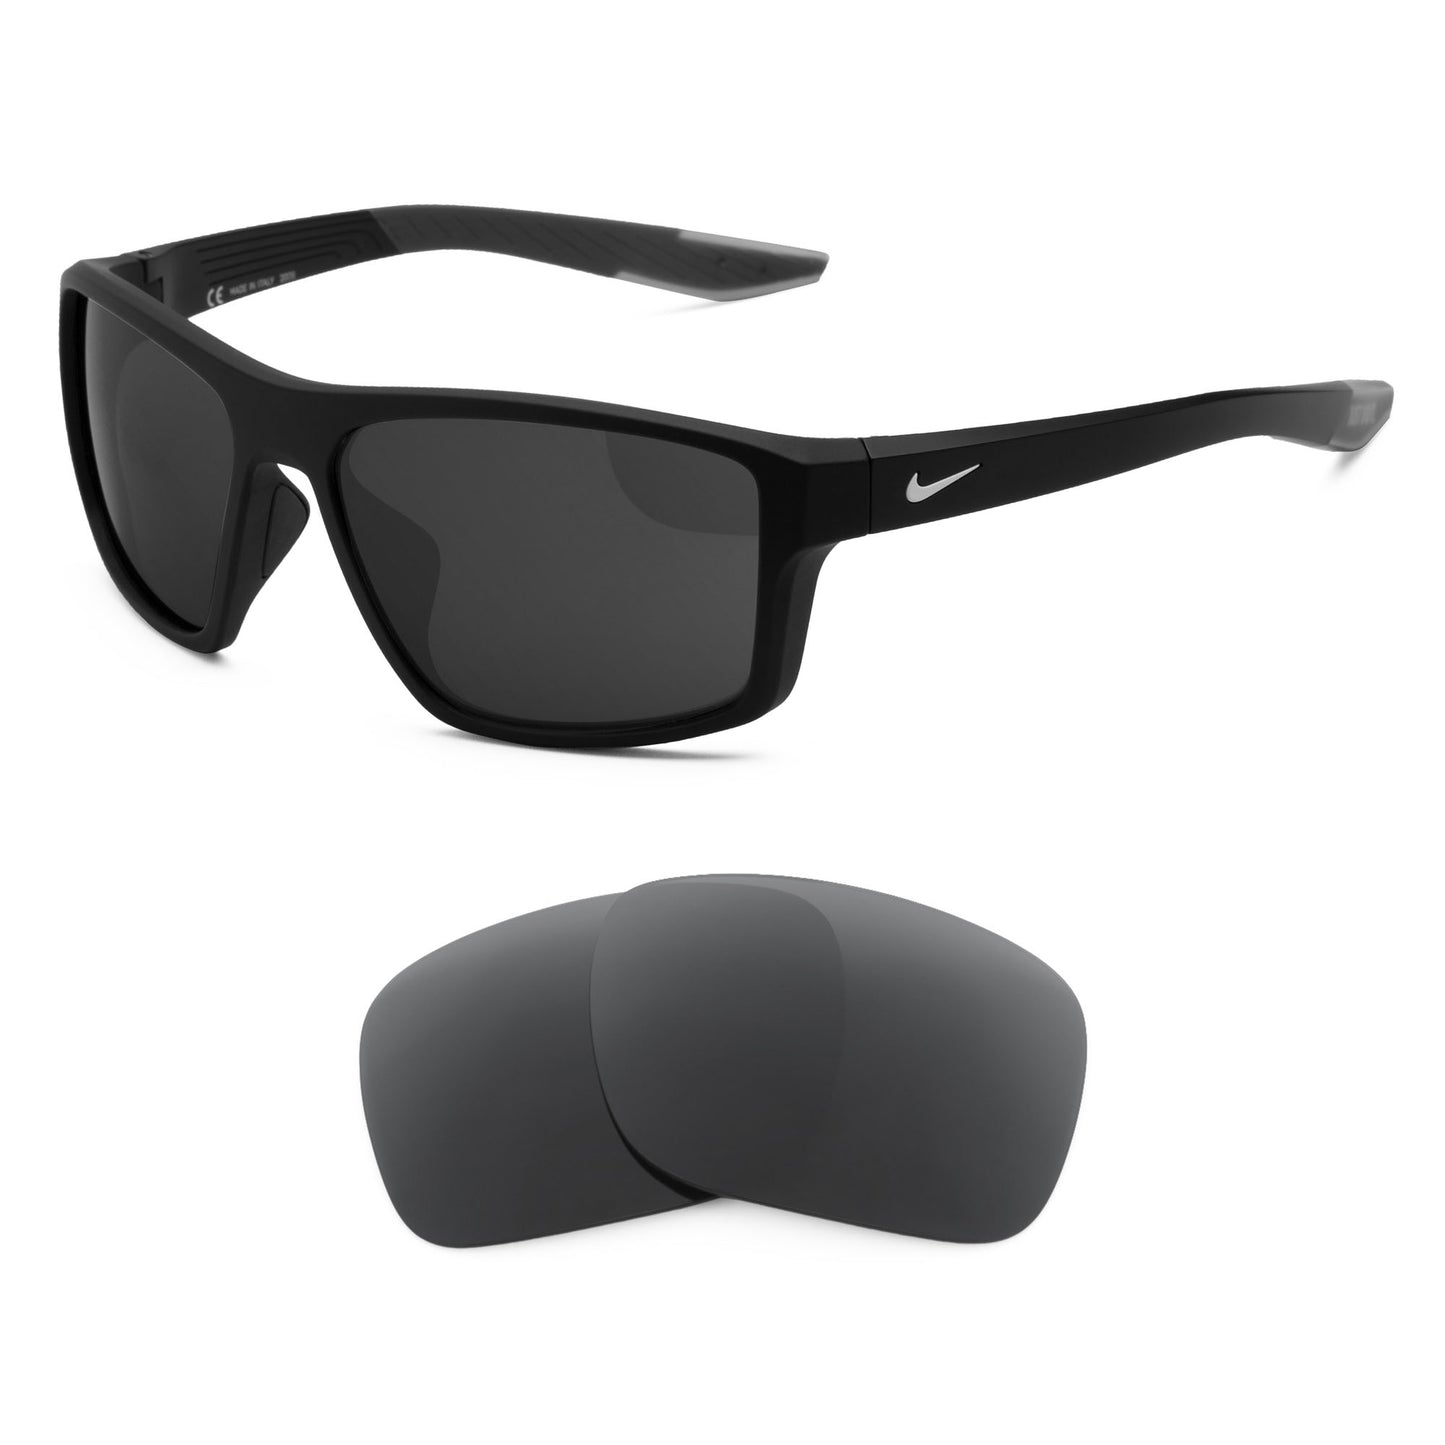 Nike Brazen Fury sunglasses with replacement lenses